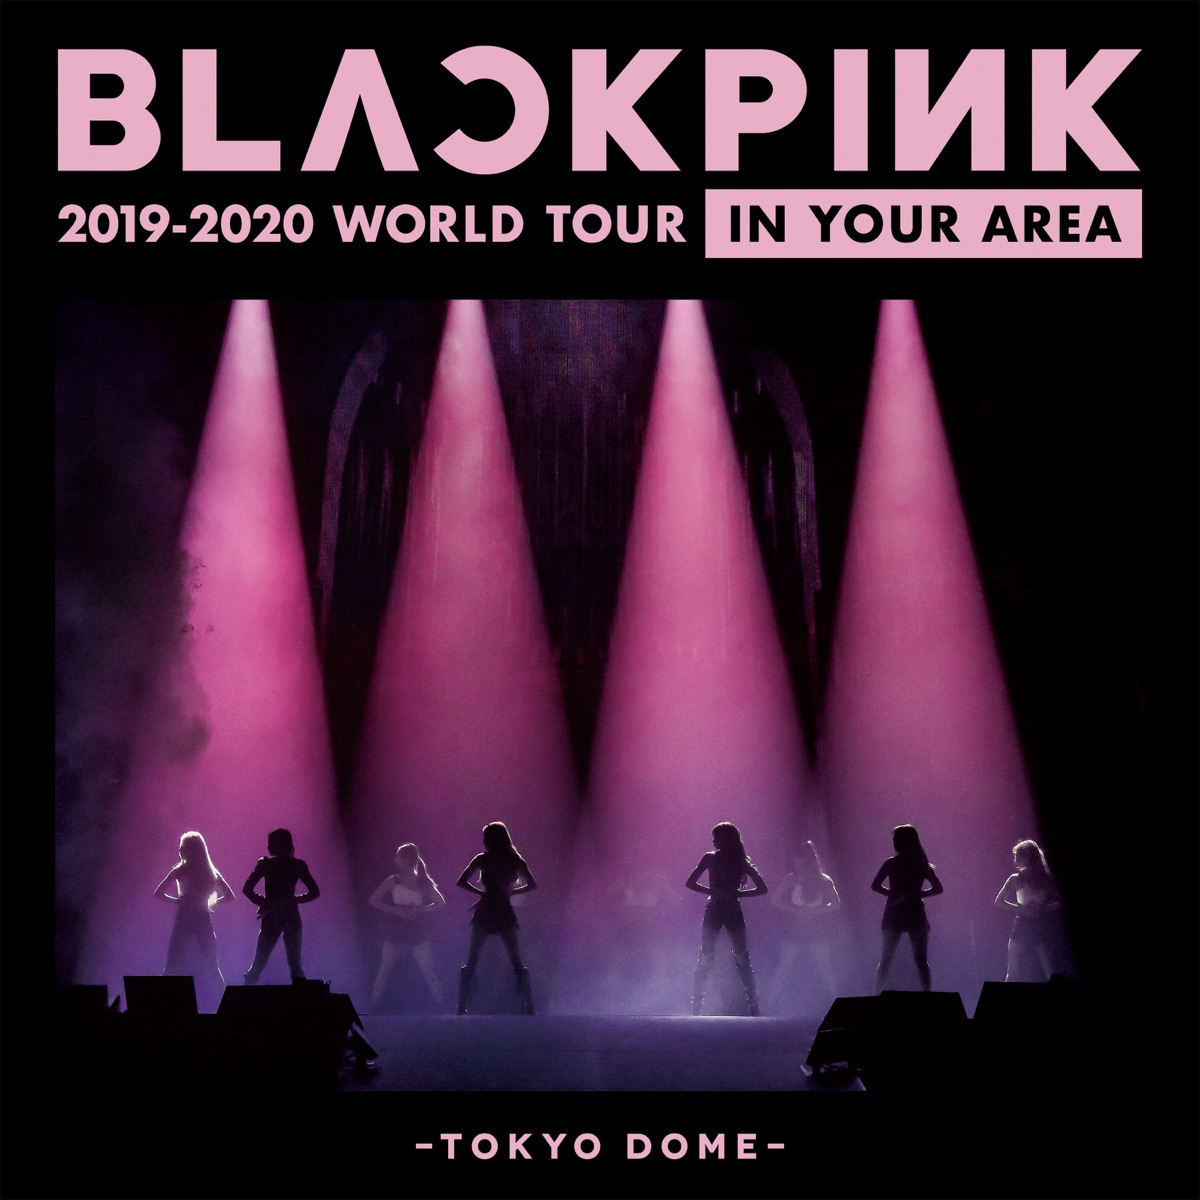 Blackpink Blackpink 2019 2020 World Tour In Your Area Tokyo Dome 